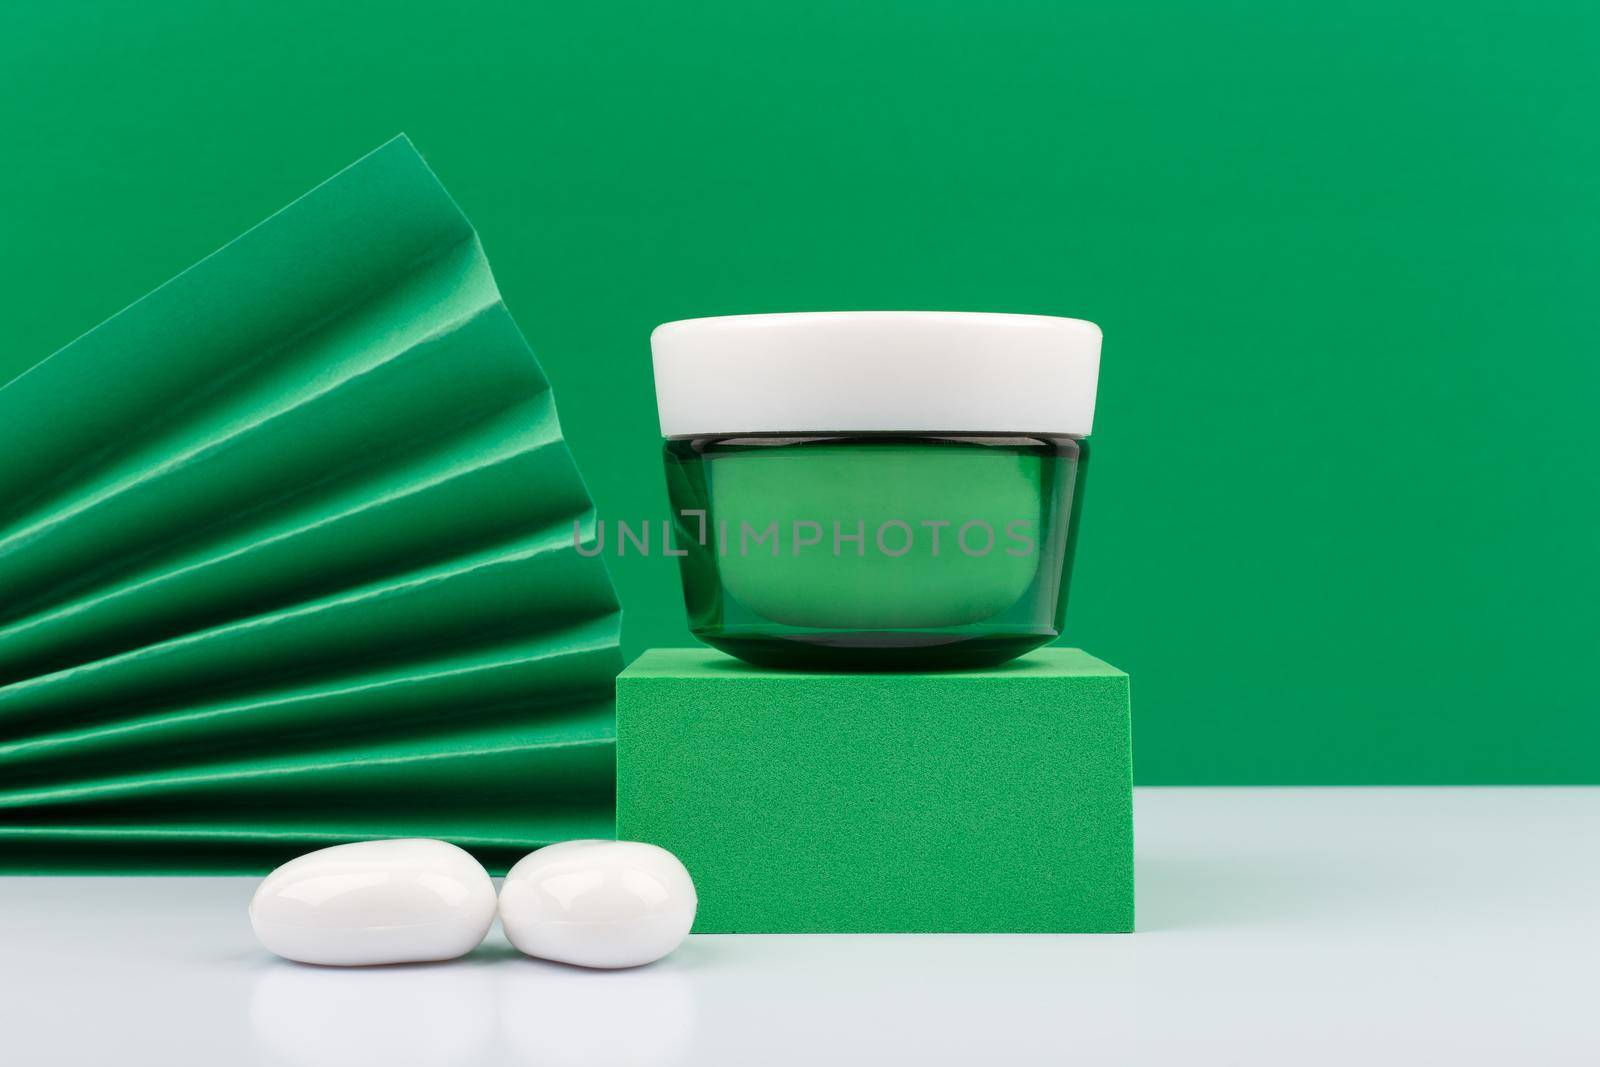 Still life with green glass cream jar on green podium against green background decorared with green waver and white stones